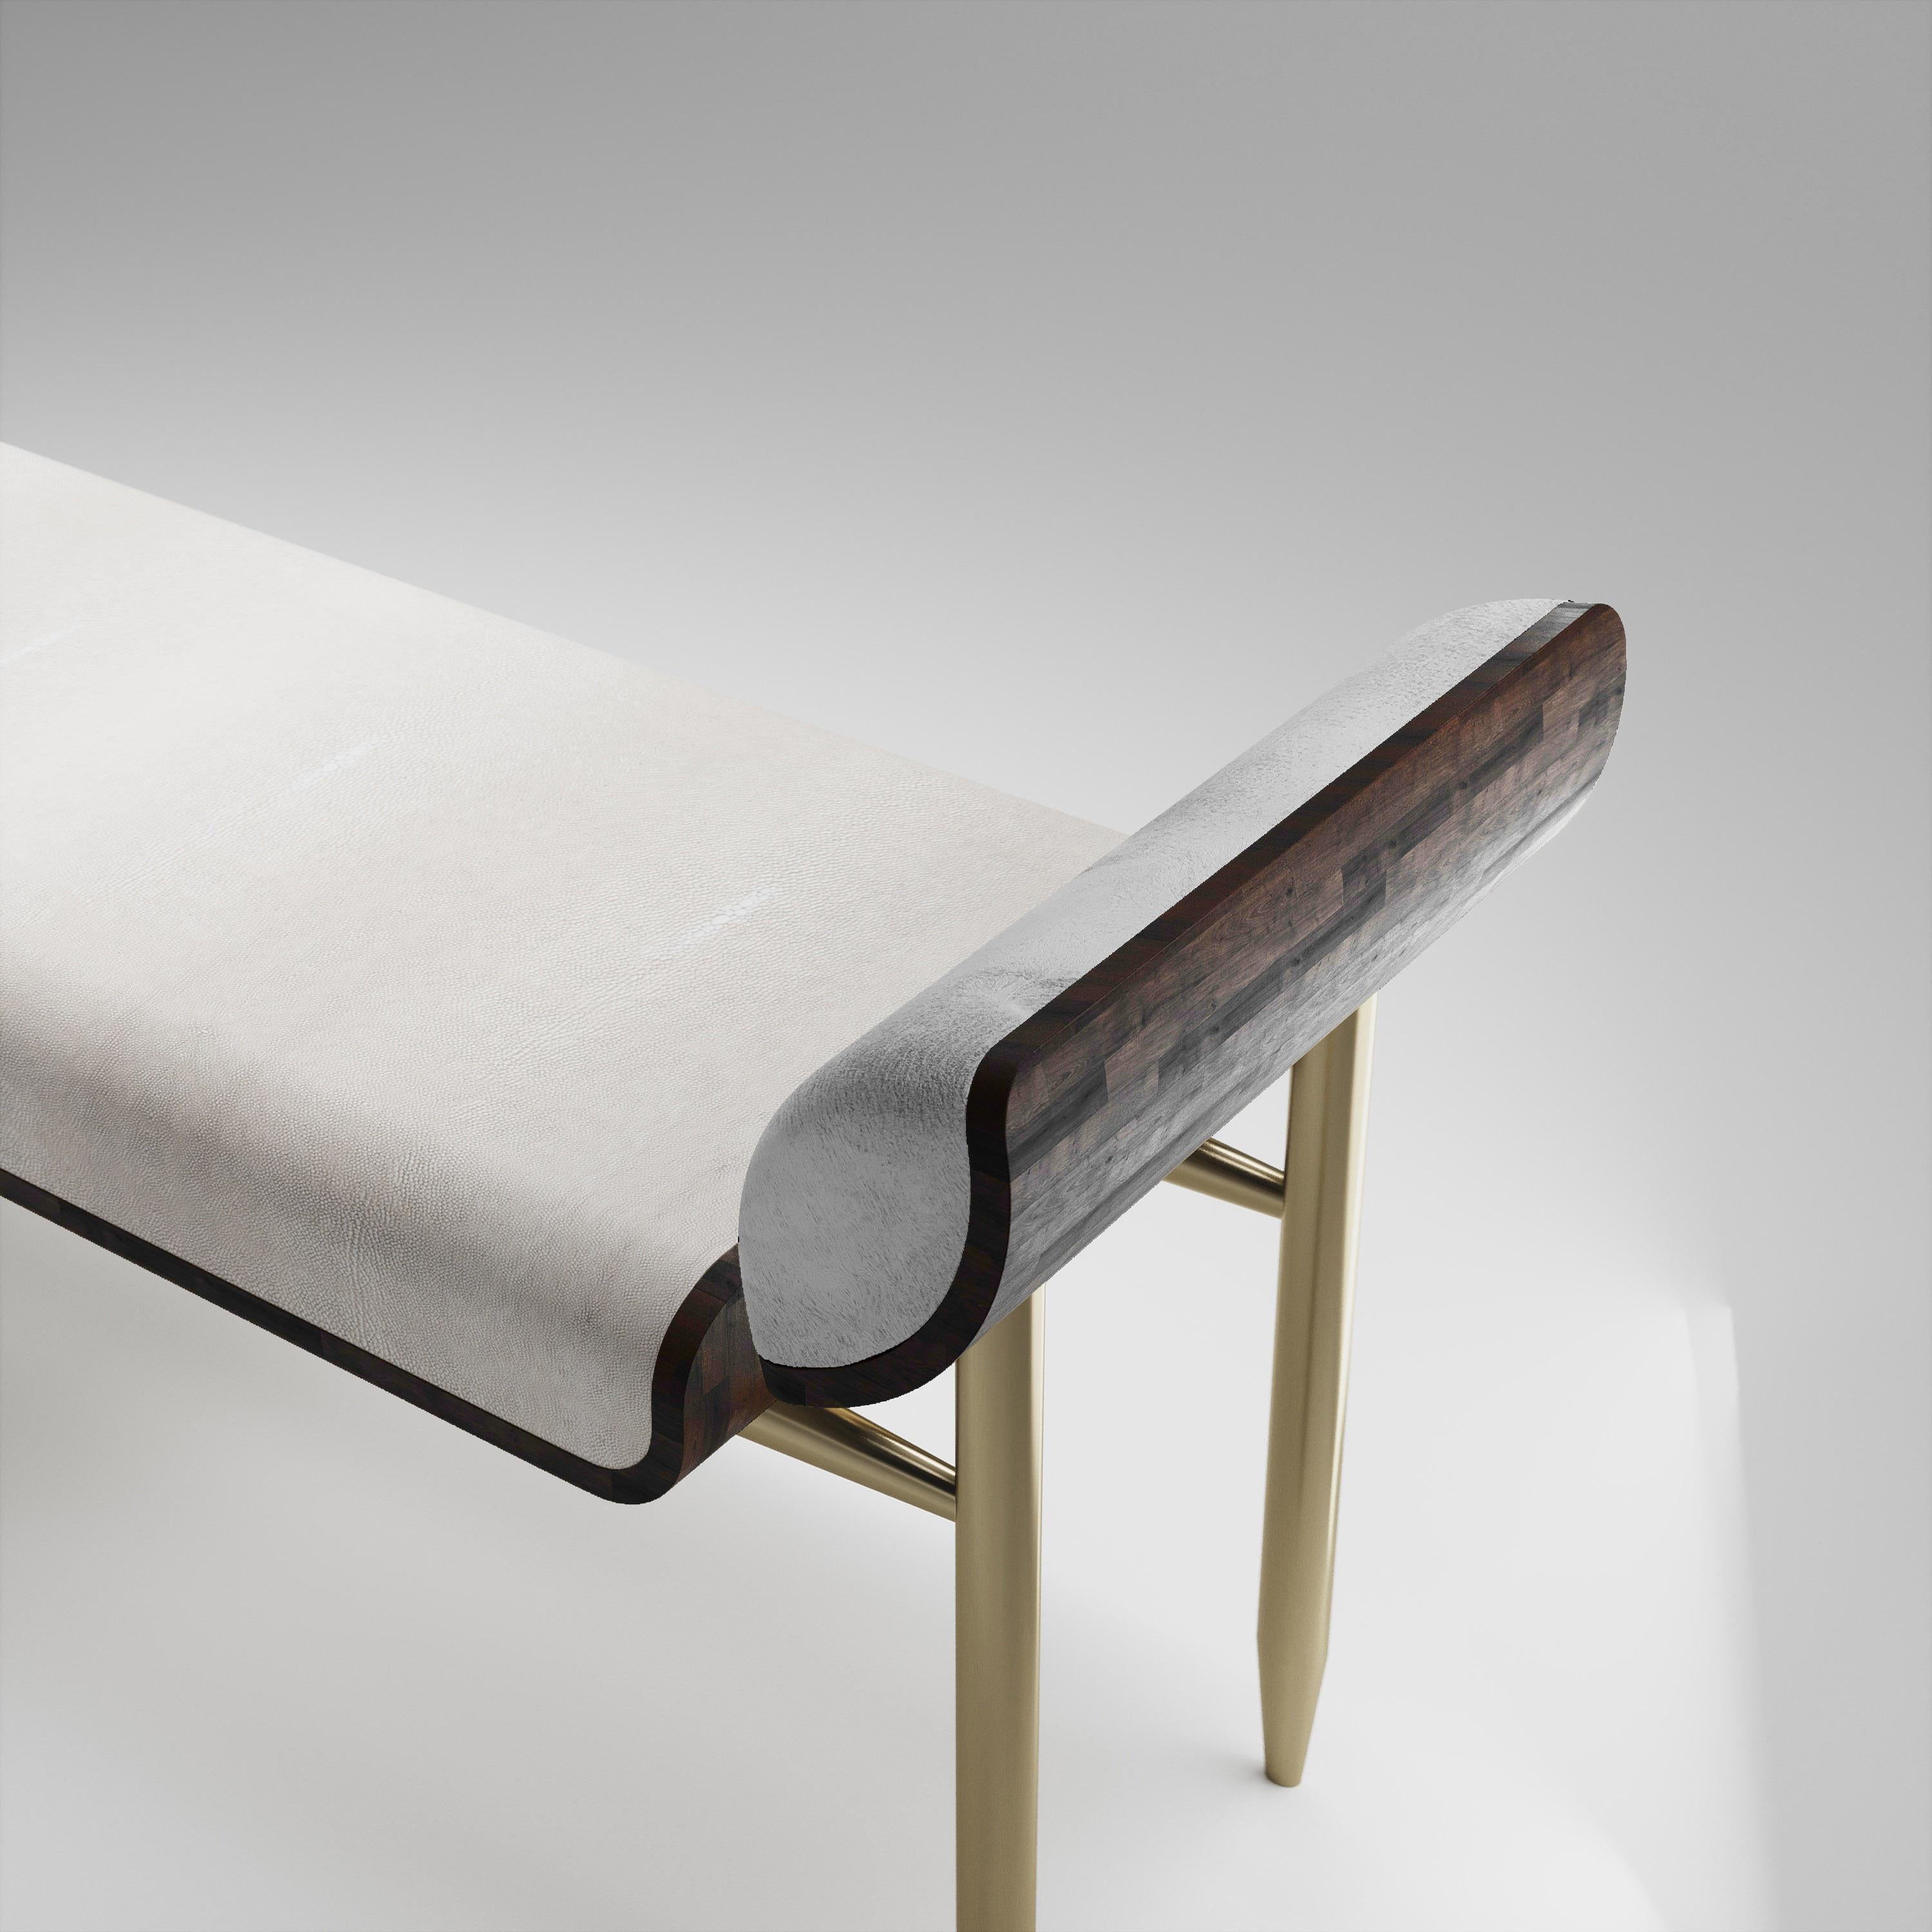 Inspired by the original Dandy bench by Kifu Paris (see images at end of slide), the Dandy II Bench is the ultimate luxury seating. The seating area is inlaid in cream shagreen the frame and sides of the bench are in Palmwood and the legs are